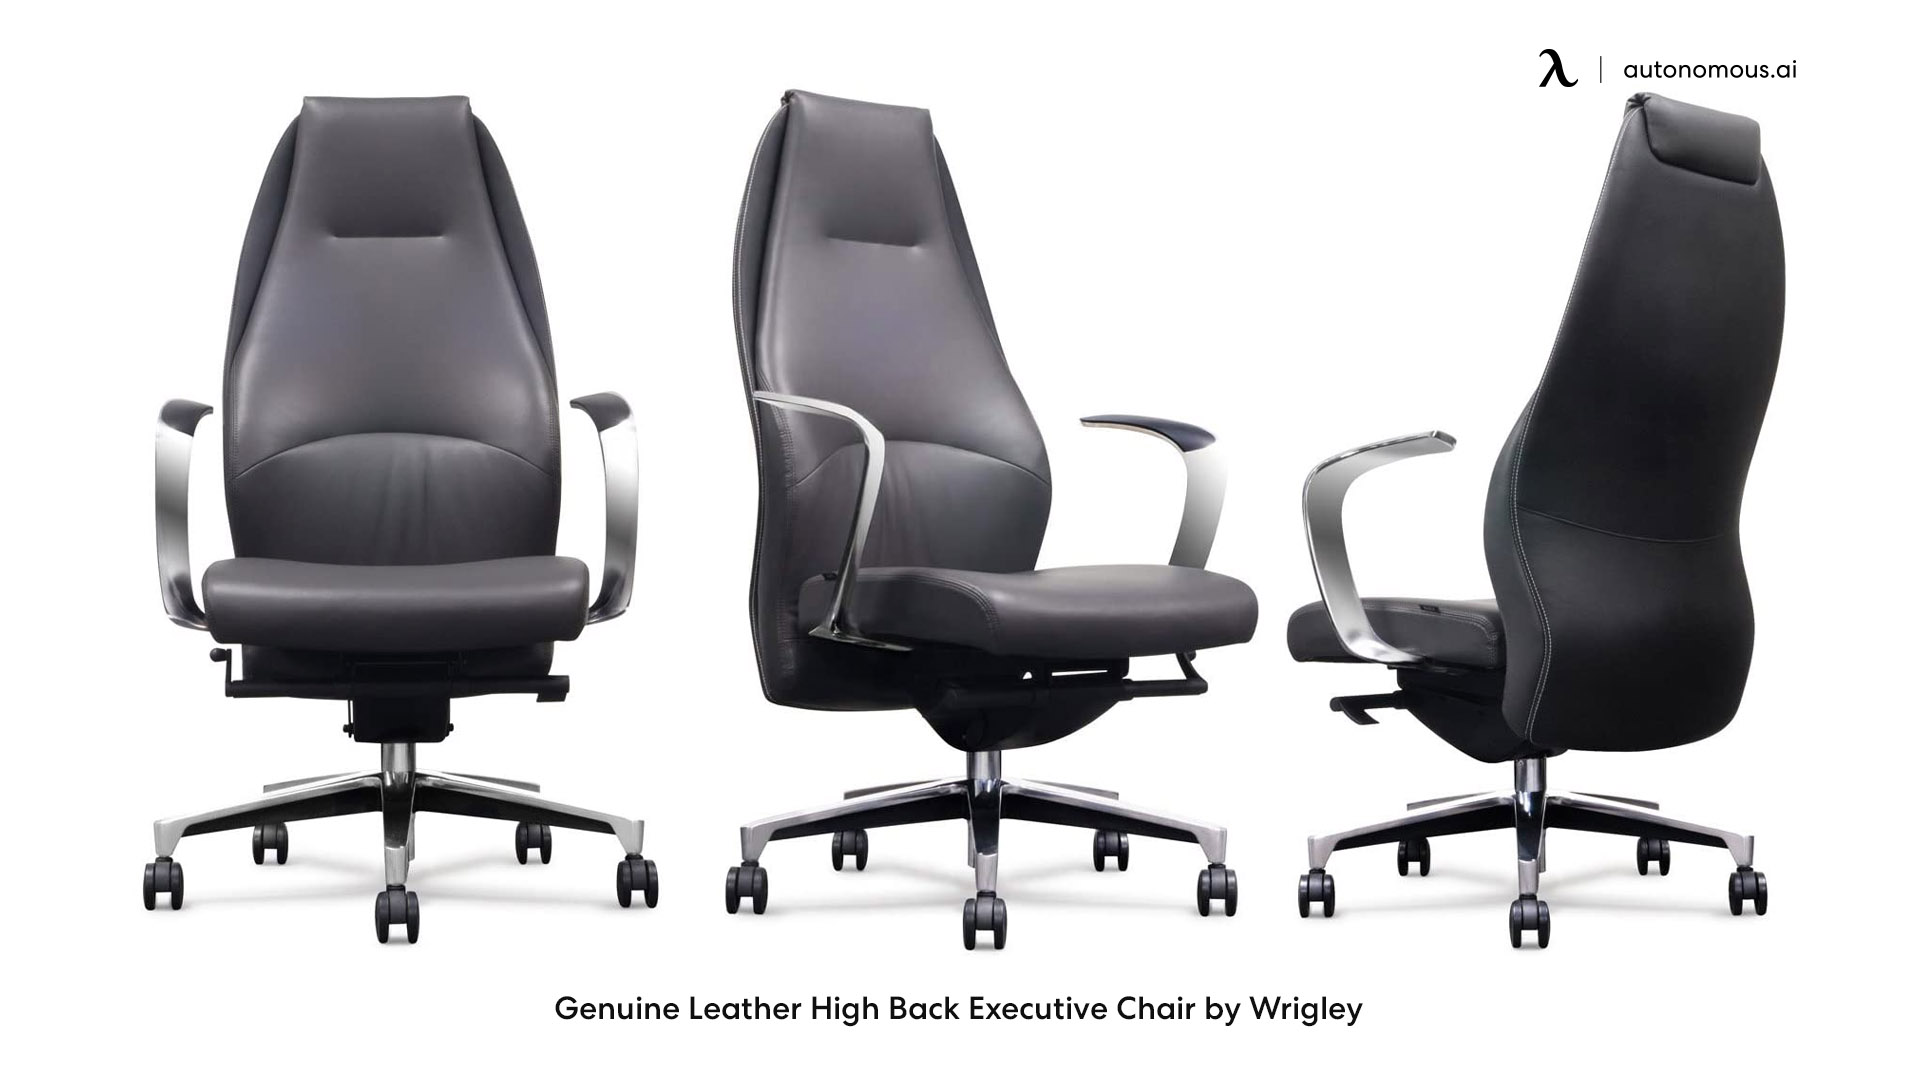 Genuine Leather High Back Executive Chair by Wrigley